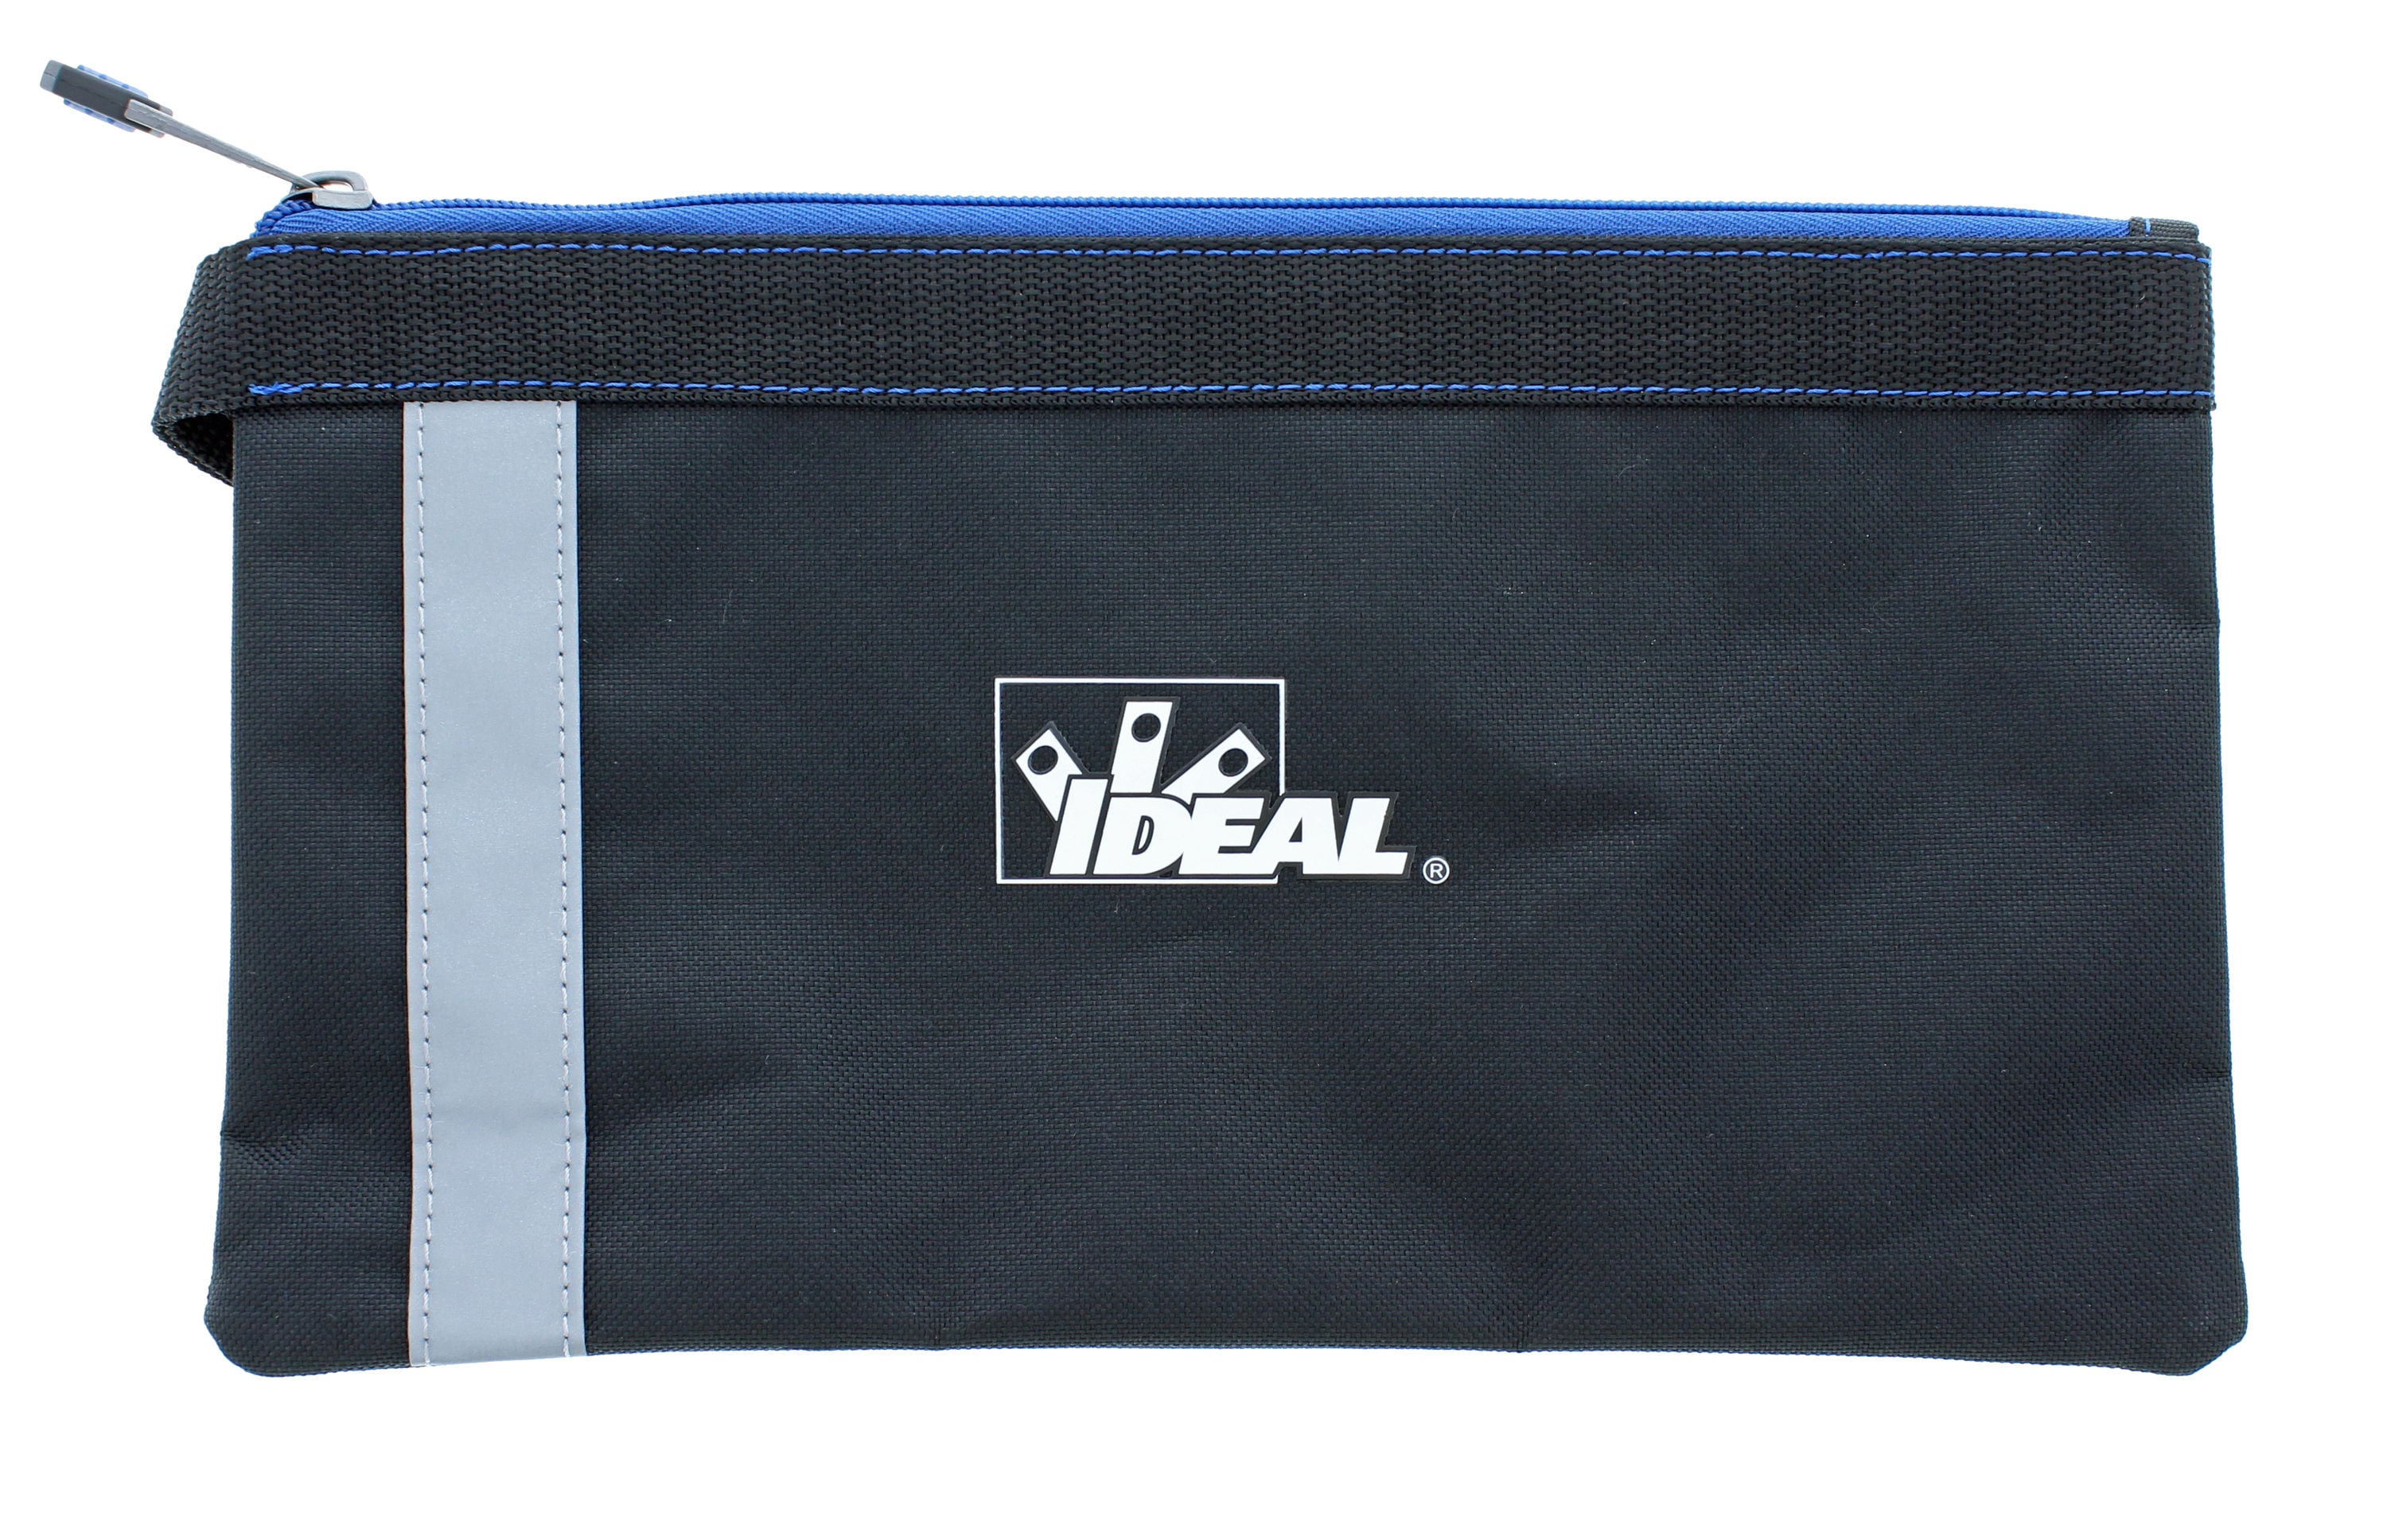 Polyester Zippered Bag with Fuller Brush & Stanley Logos - Other